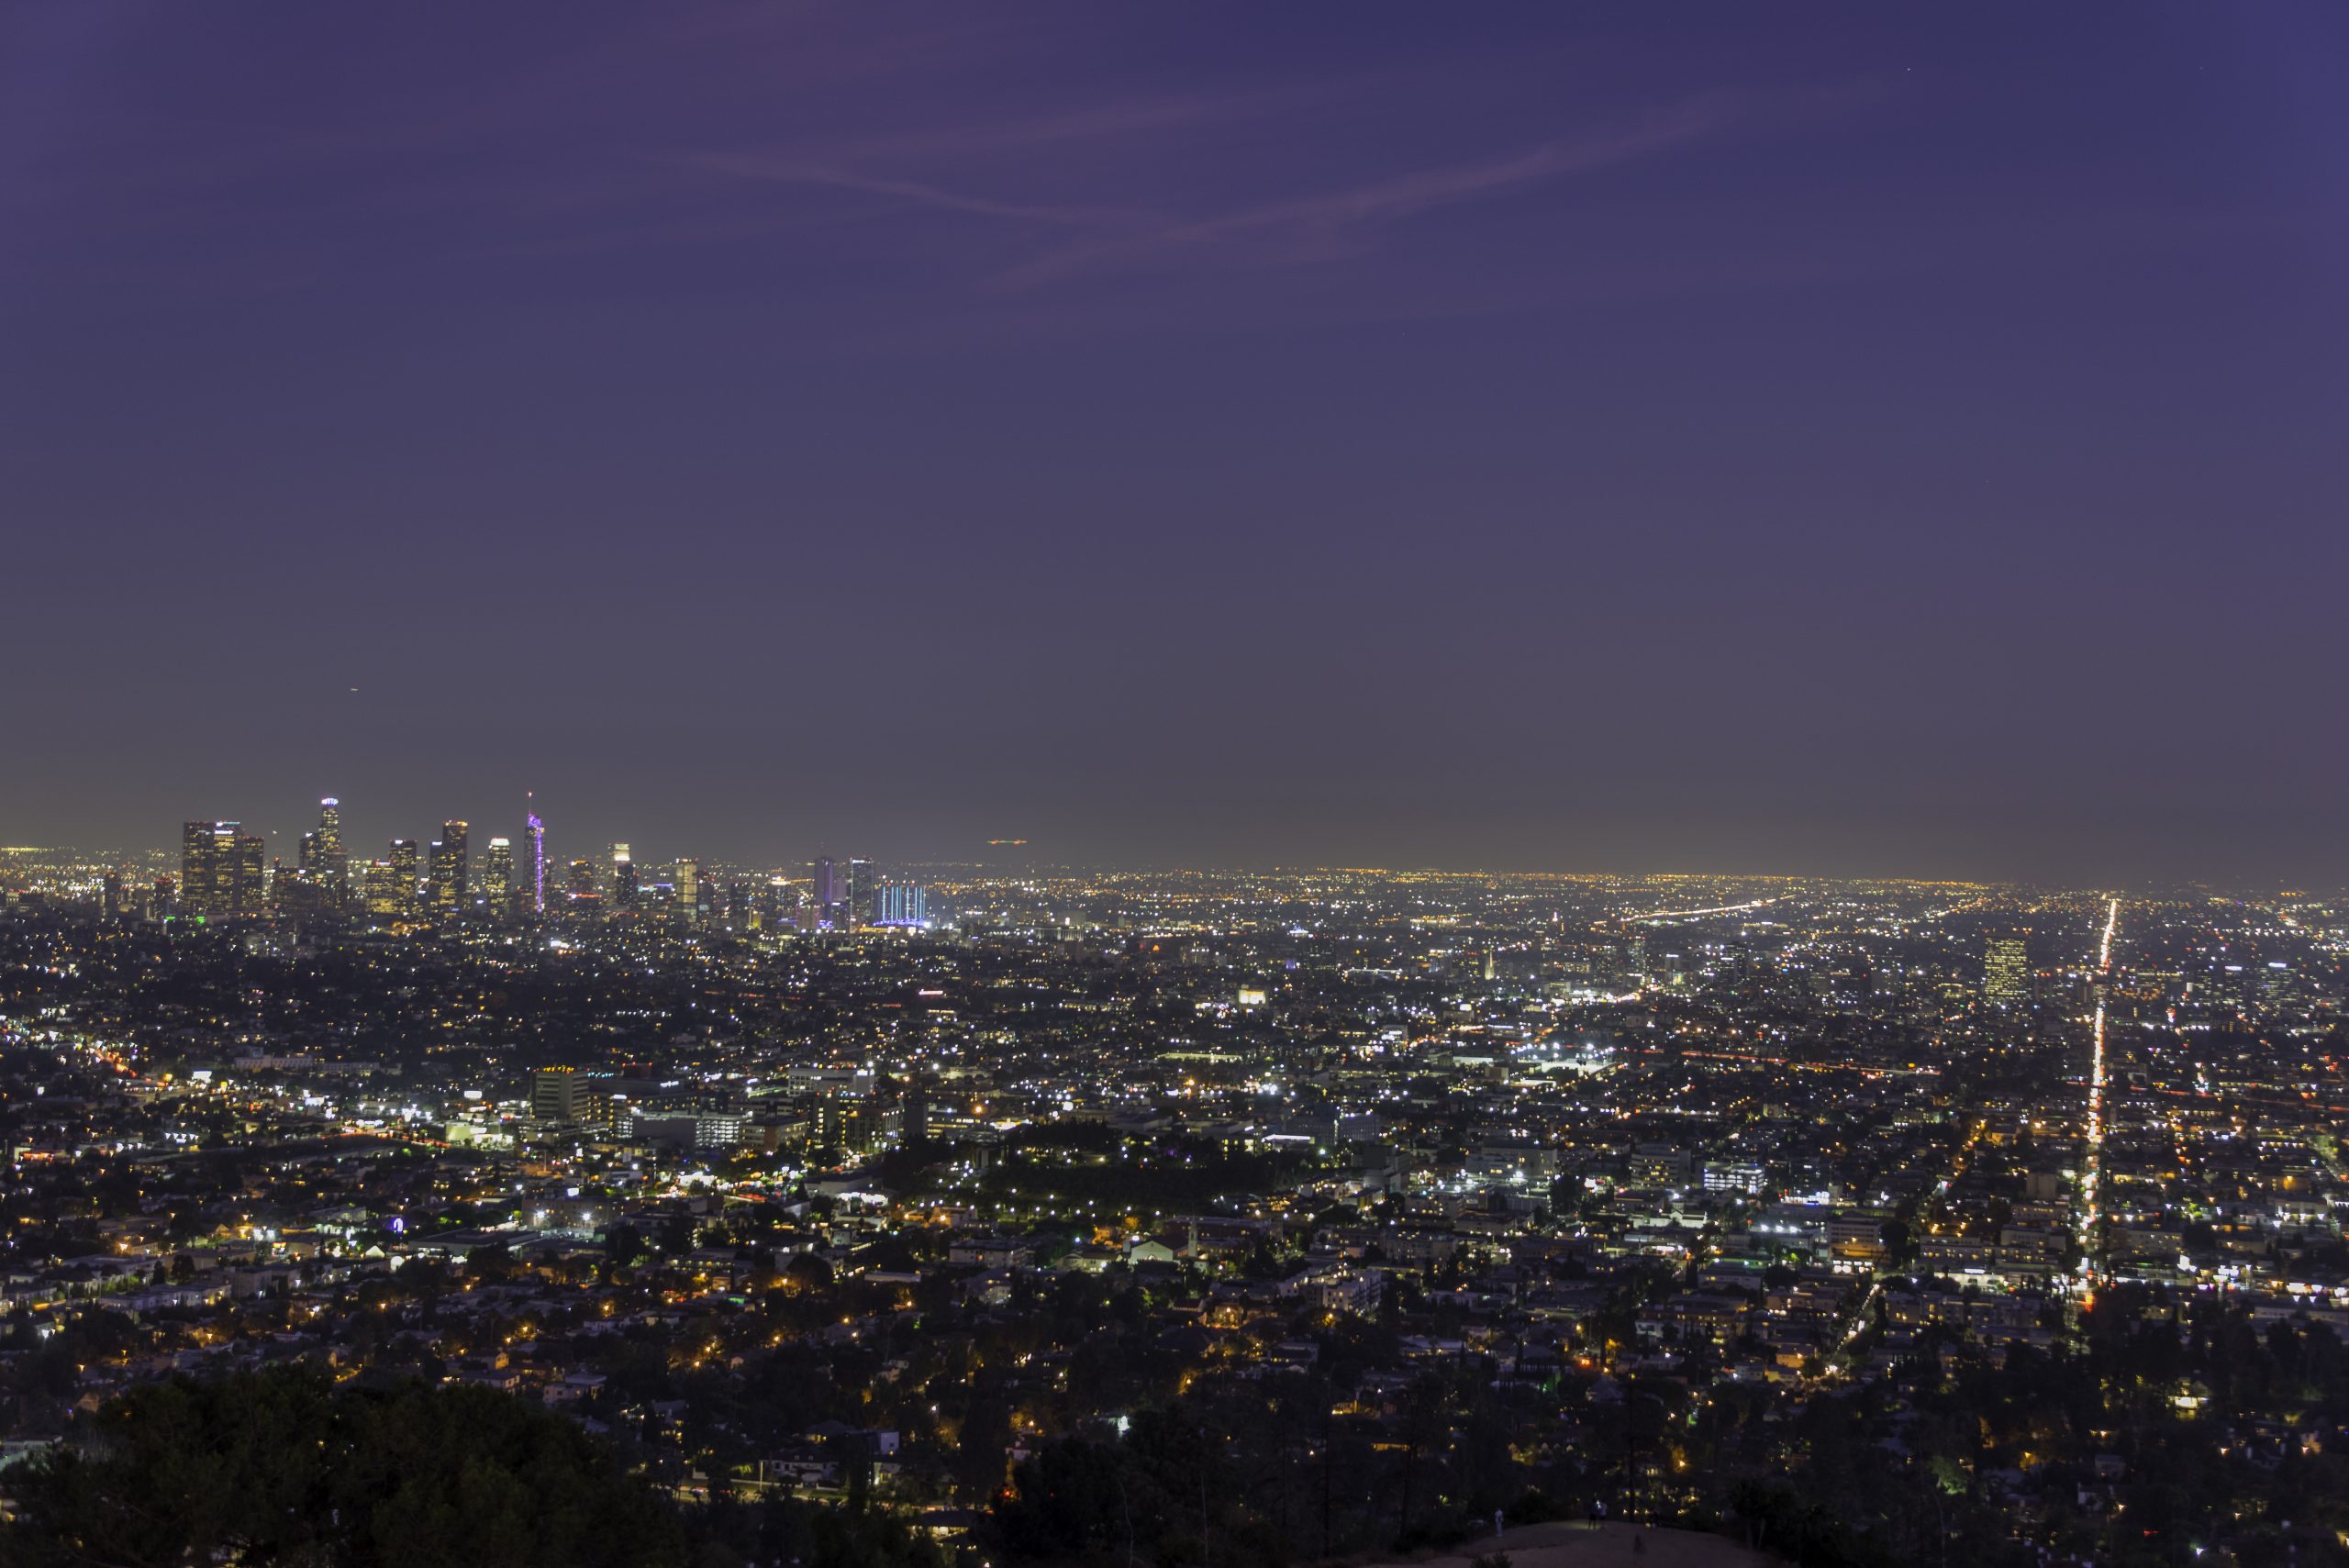 Los Angeles By night